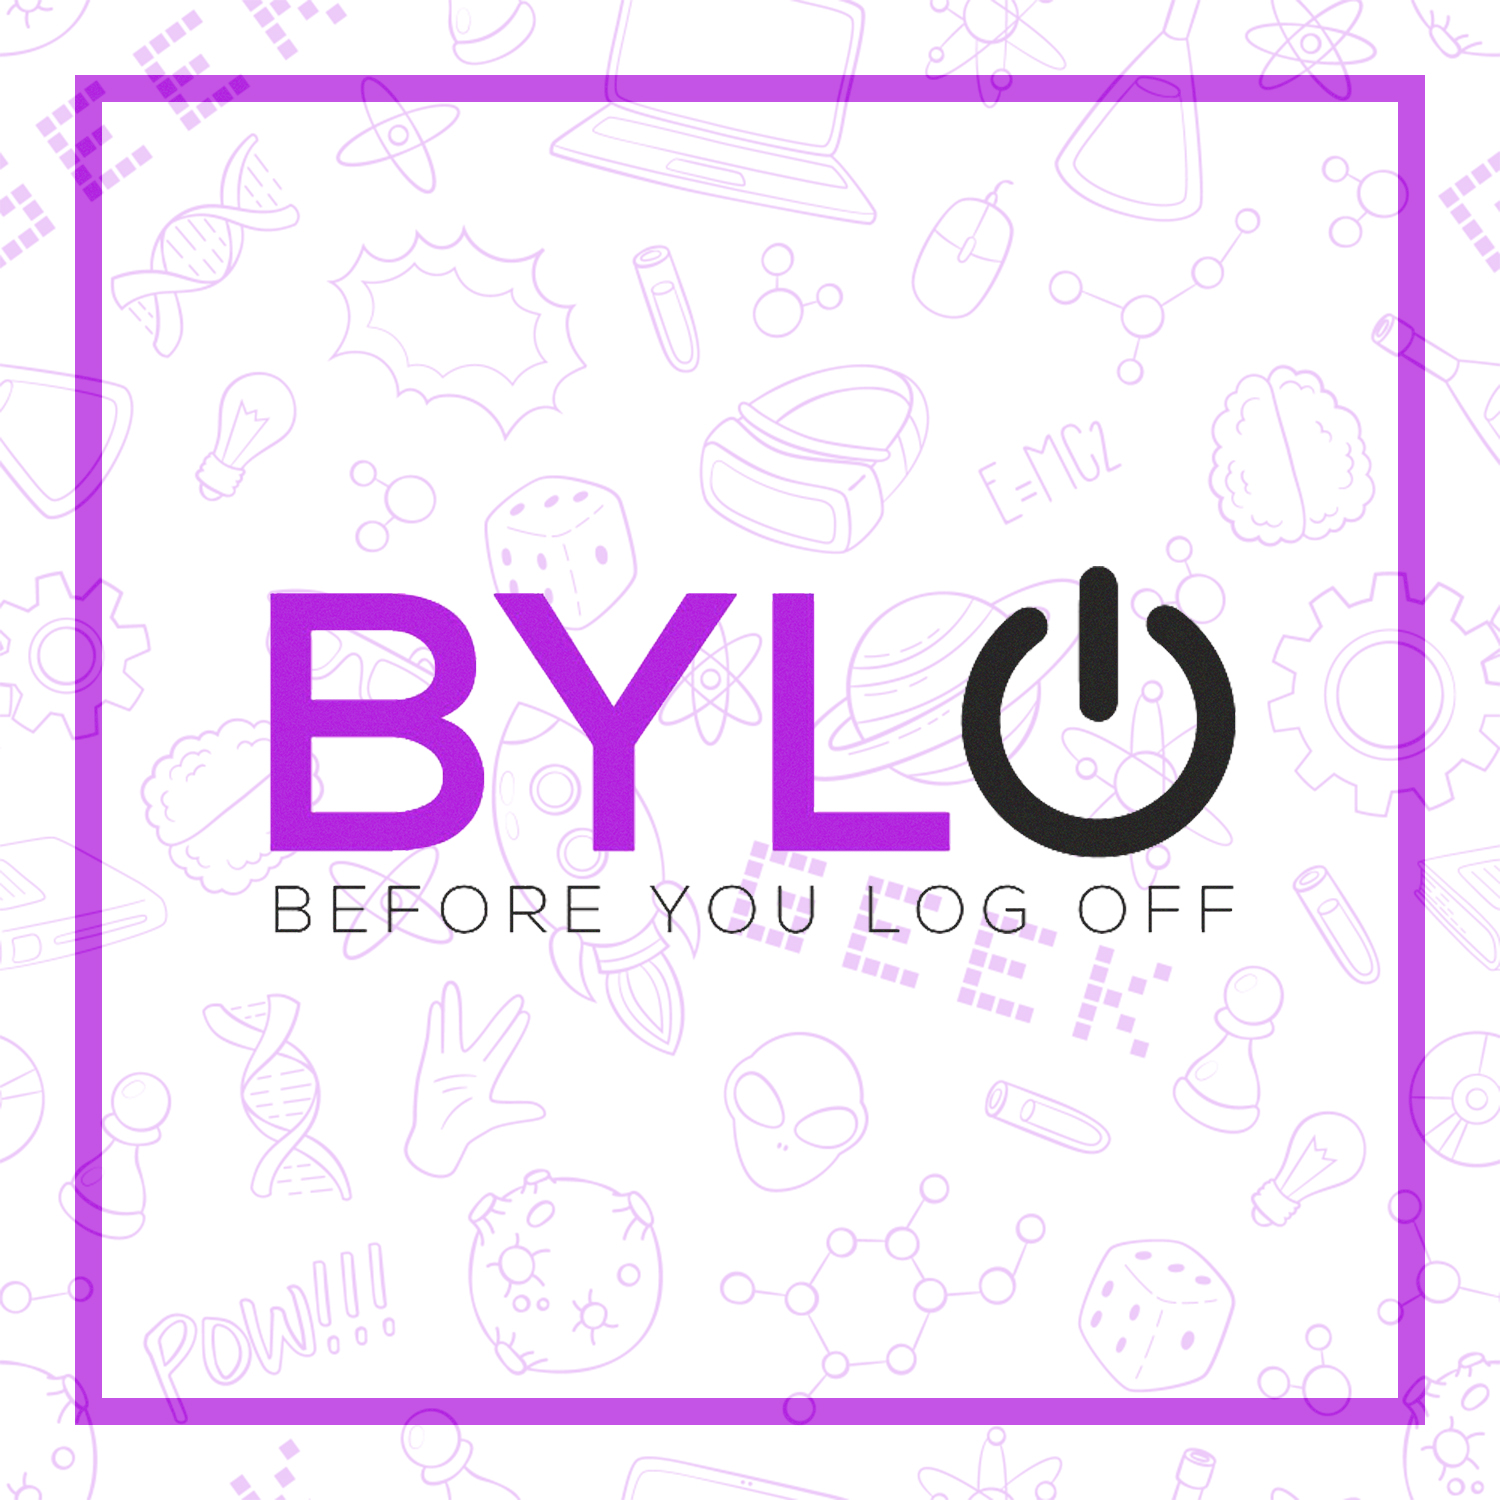 BYLO ep 84: Is E3 still relevant?